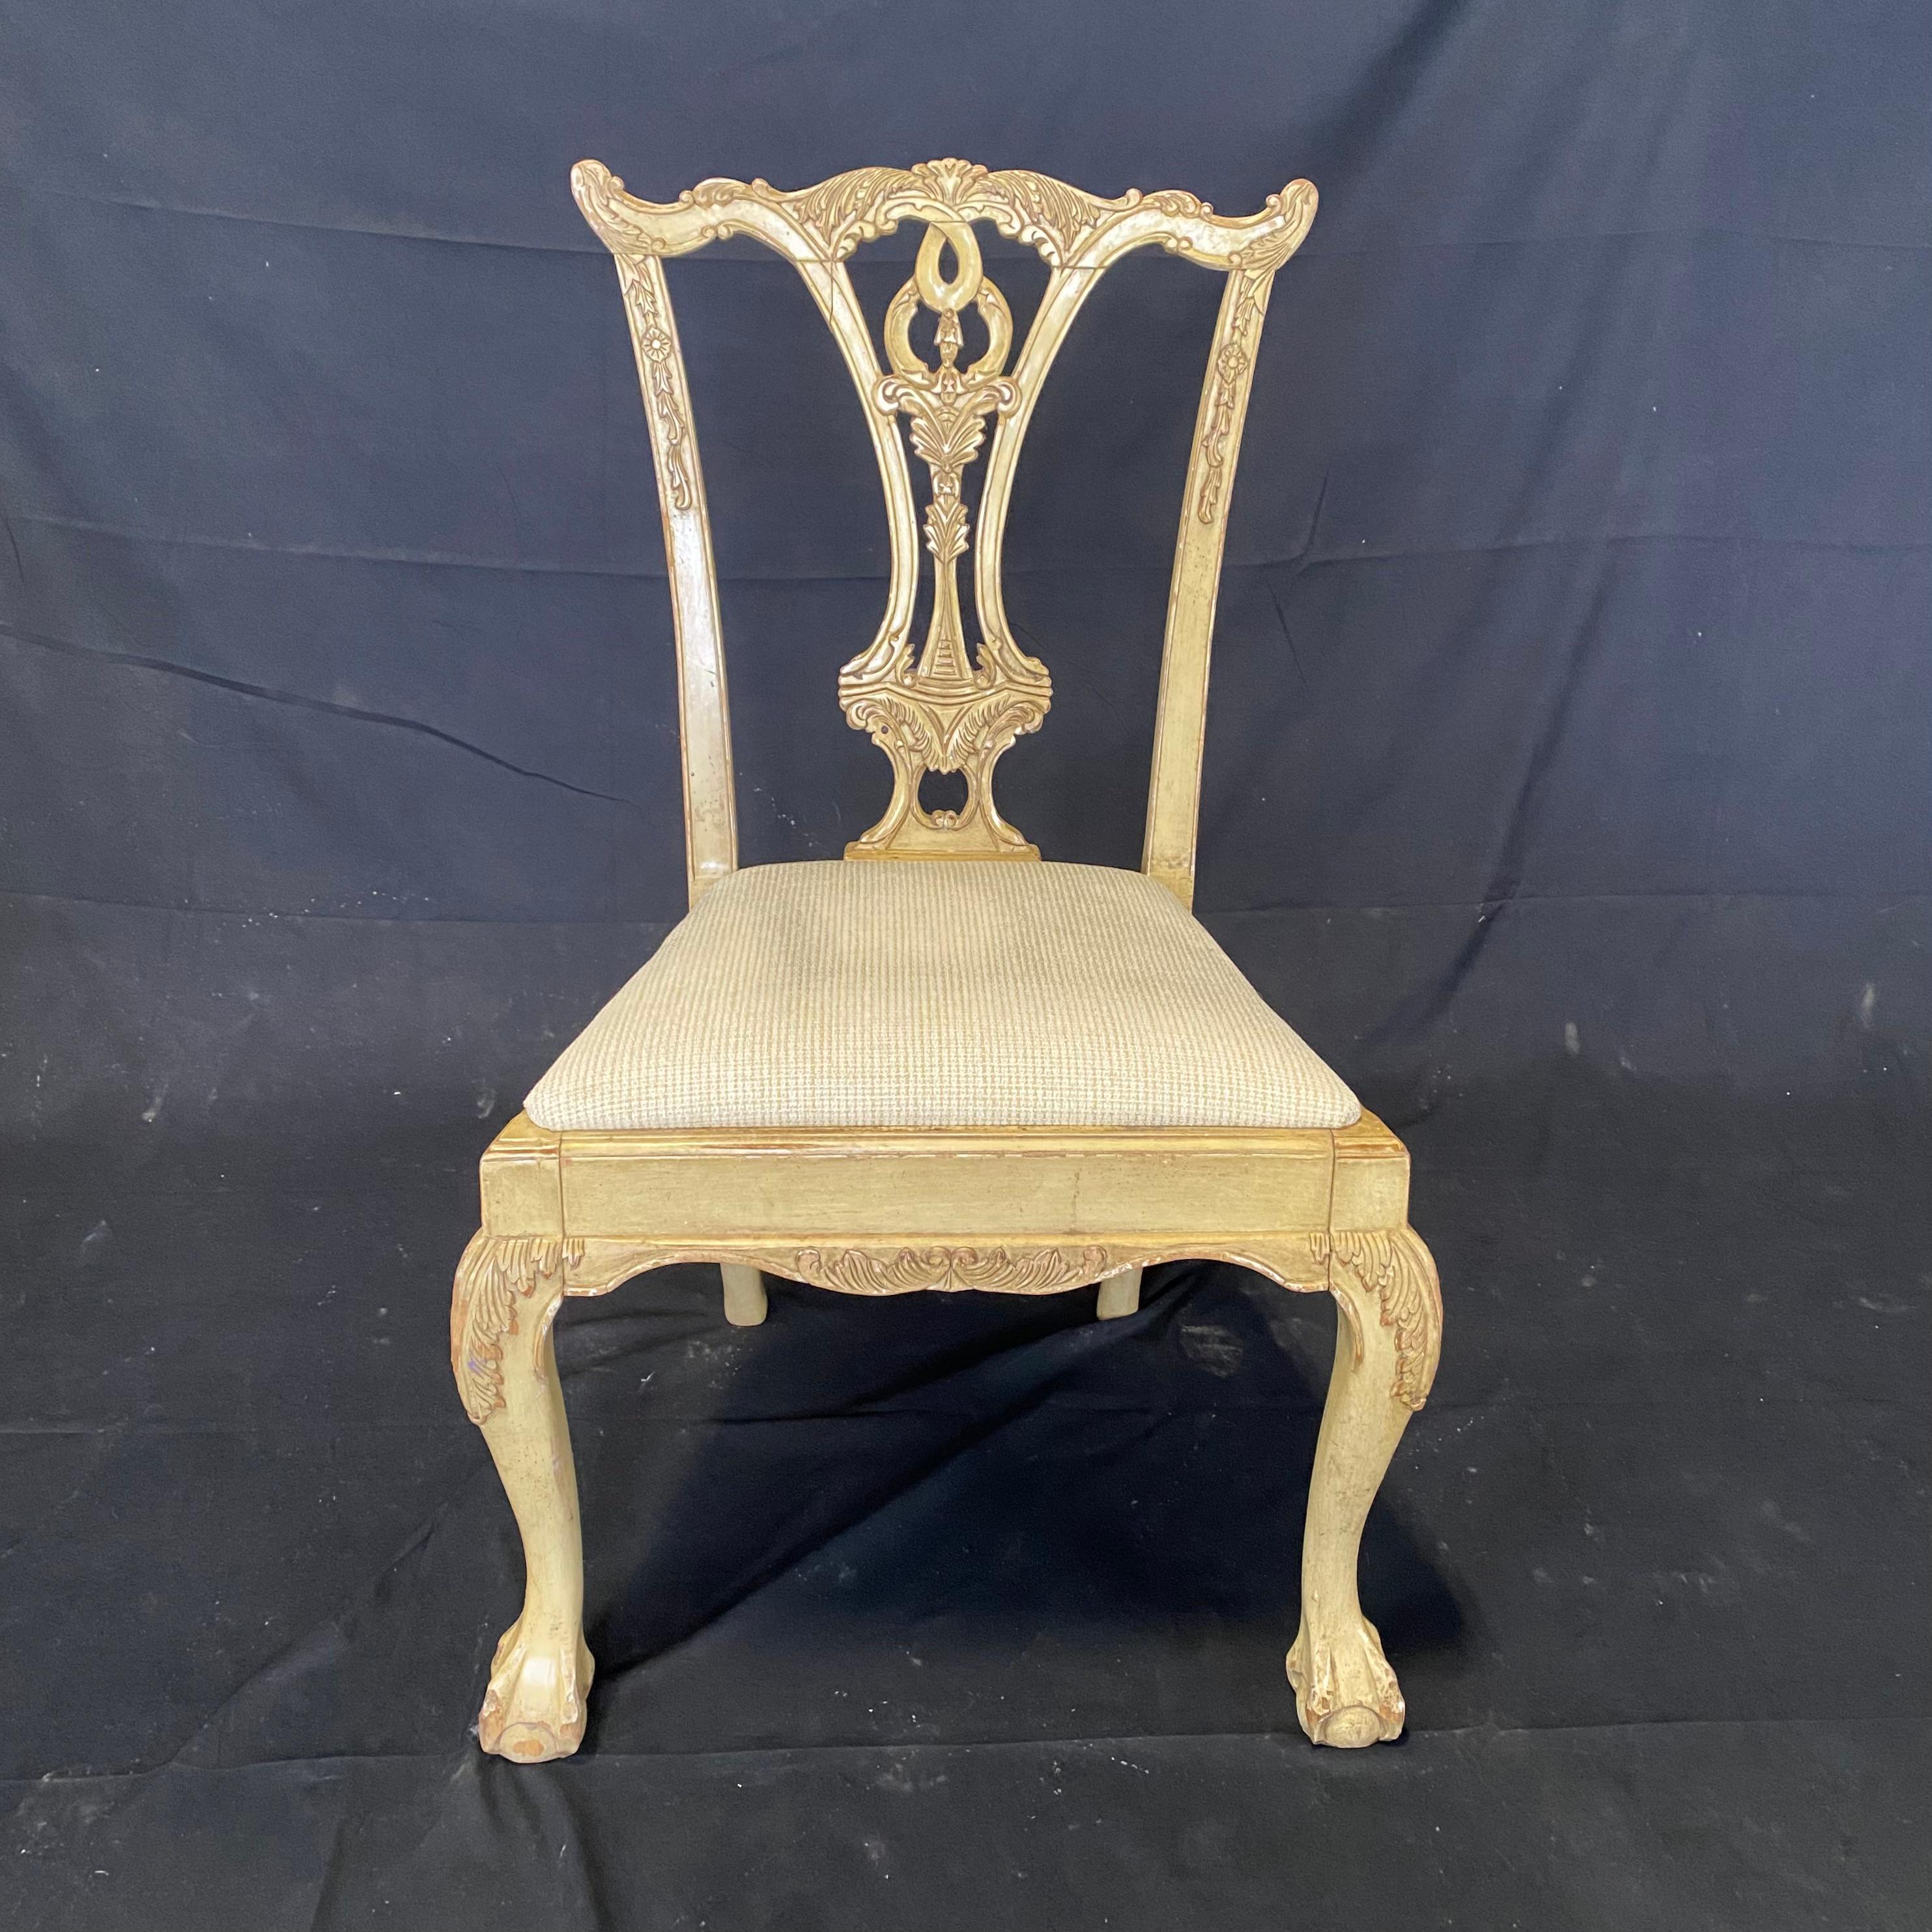 A set of six British dining side chairs in the Chippendale style, solid mahogany with carved back splat, new ivory and goldish beige textured high quality upholstered seat, cabriole legs and ball in claw feet. Two armchairs and four side chairs.